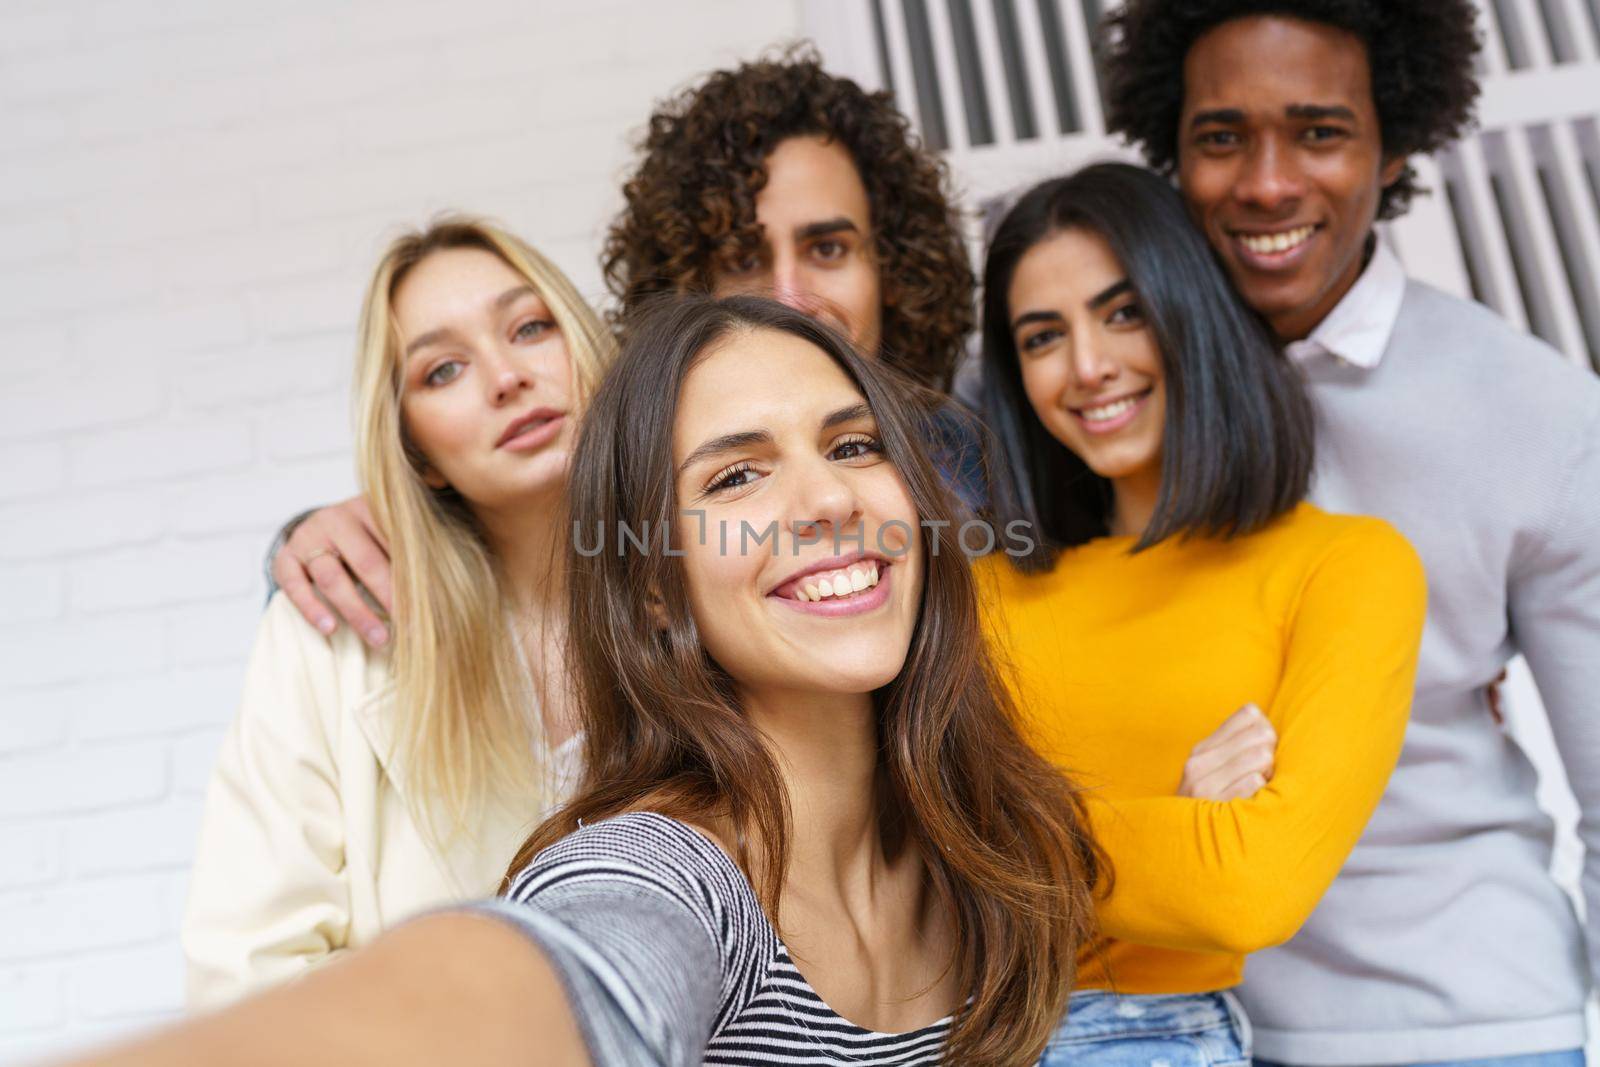 Multi-ethnic group of friends taking a selfie together while having fun in the street. Caucasian girl in the foreground.